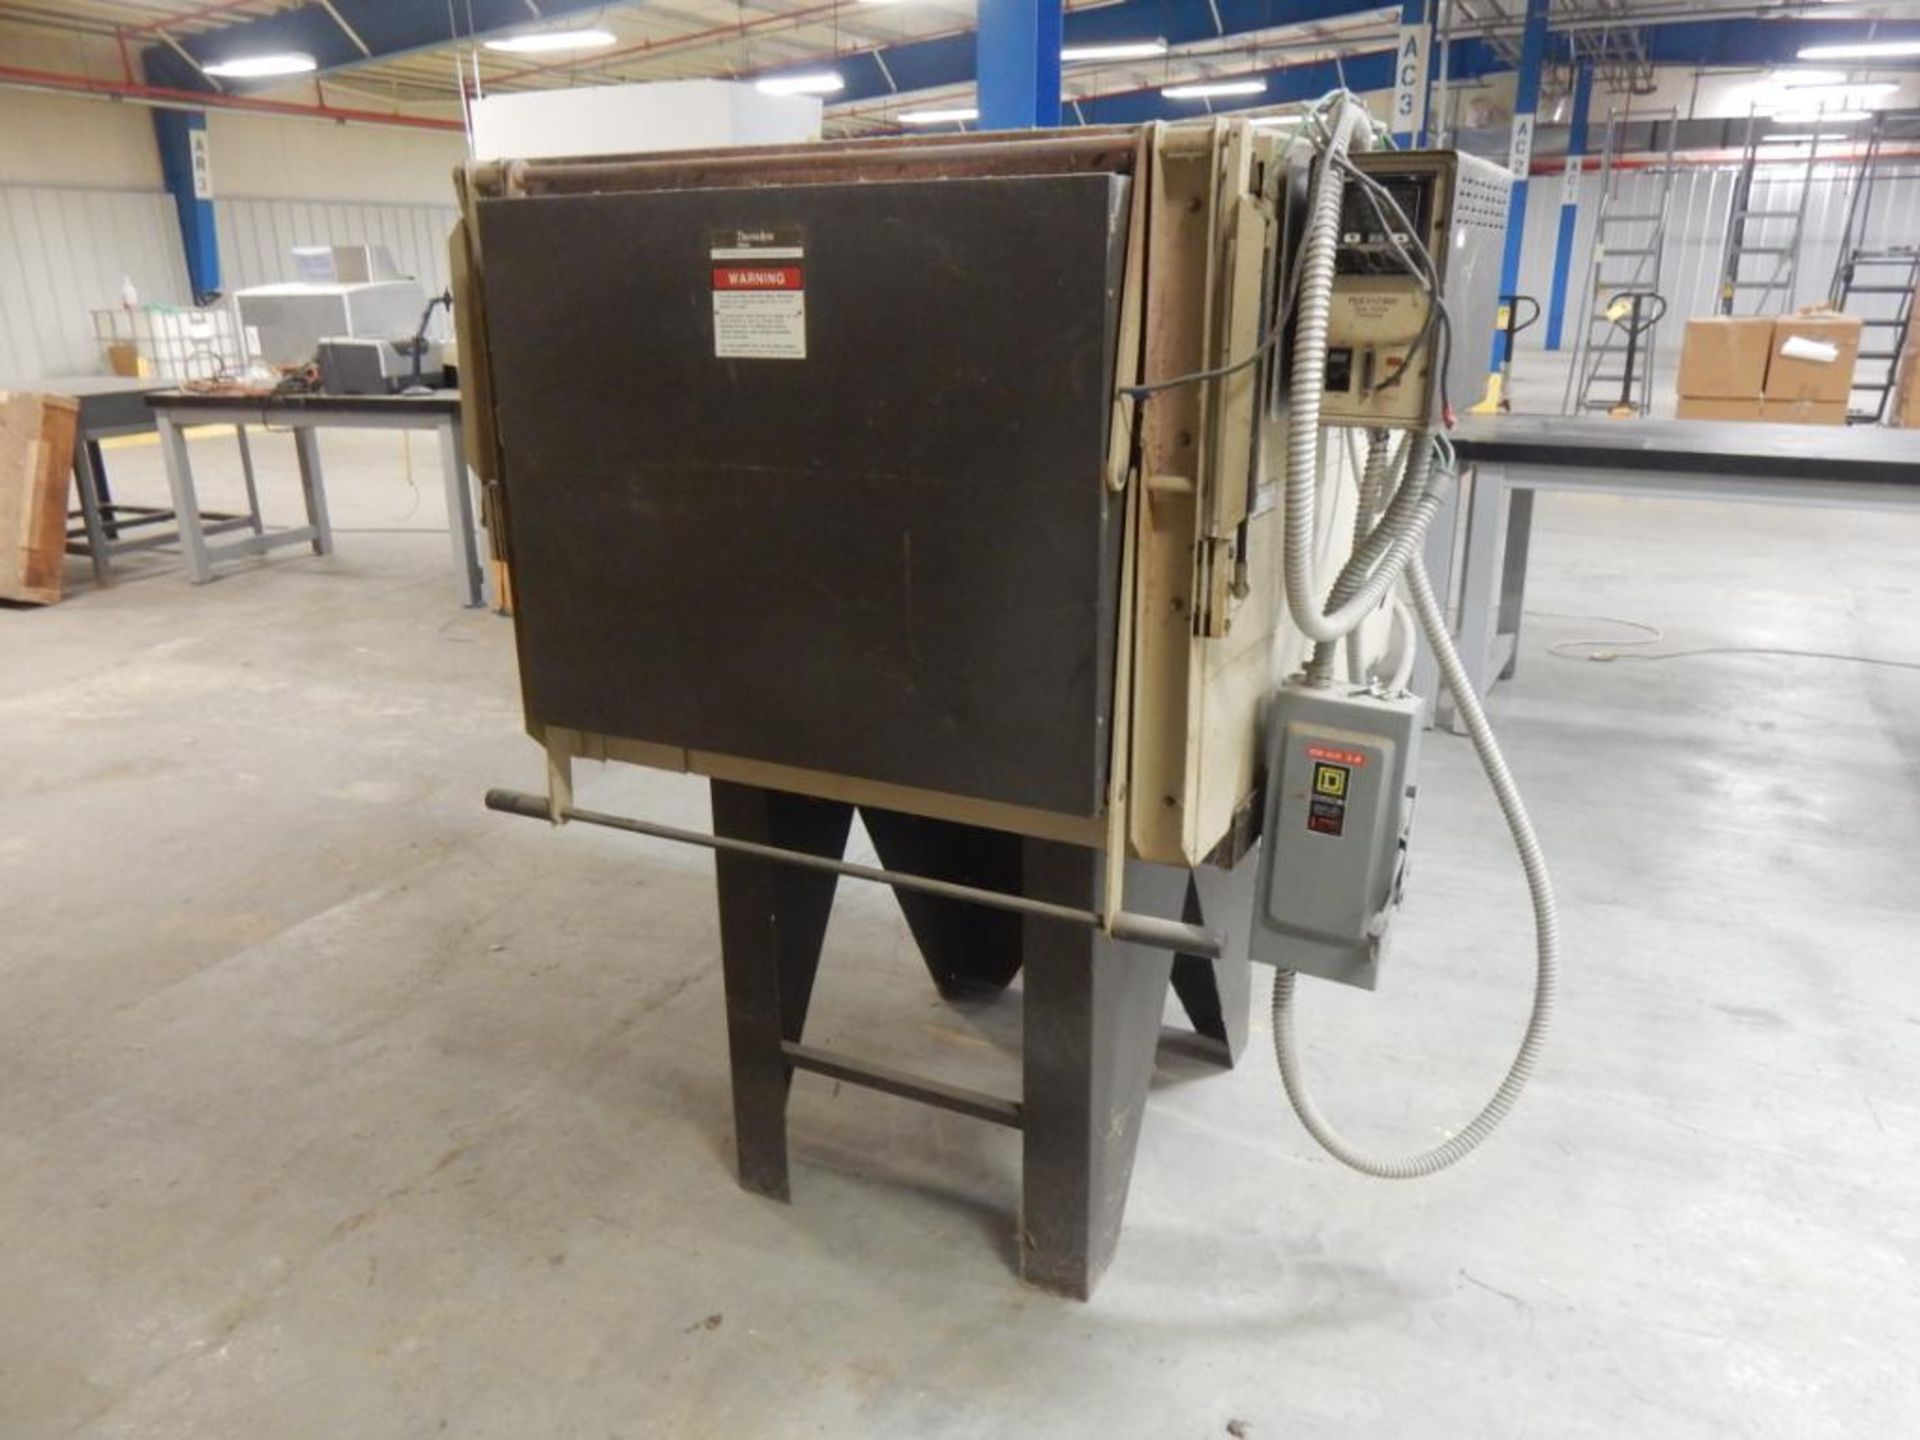 THERMOLYNE F31750-61 ELEC. FURNACE, S/N 317901022816, 20 KW, 24" X 18" X 36" I.D. - Image 2 of 2